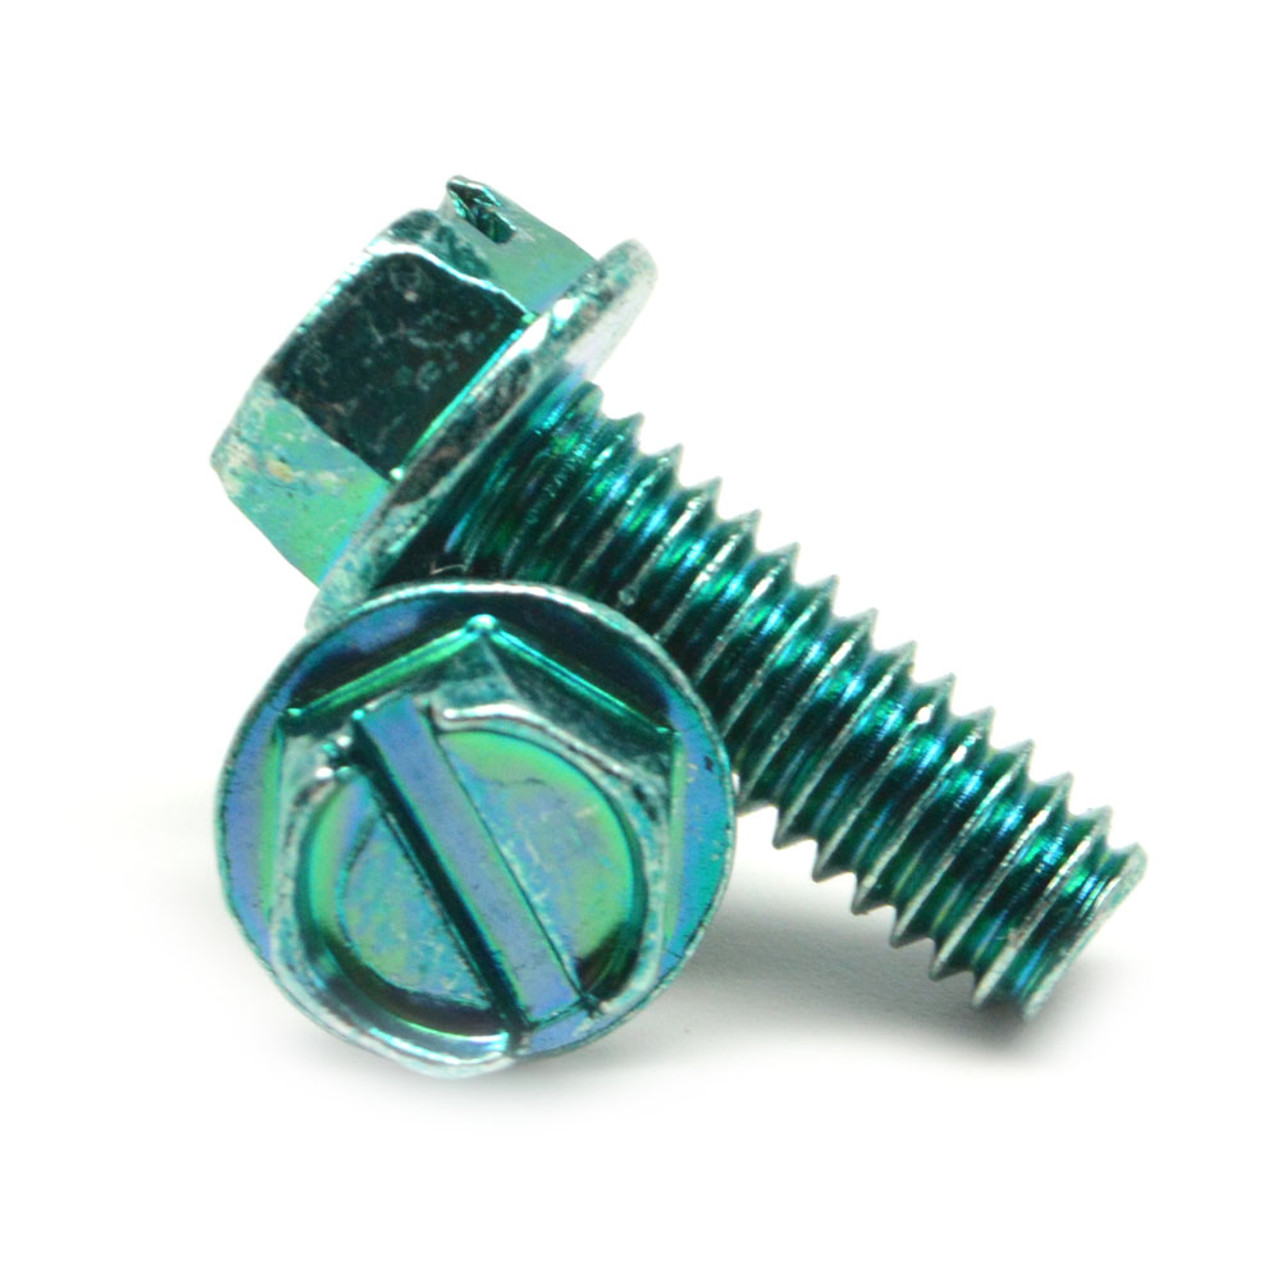 #8-32 x 5/8" (FT) Coarse Thread Machine Screw Slotted Hex Washer Head Low Carbon Steel Green Zinc Plated